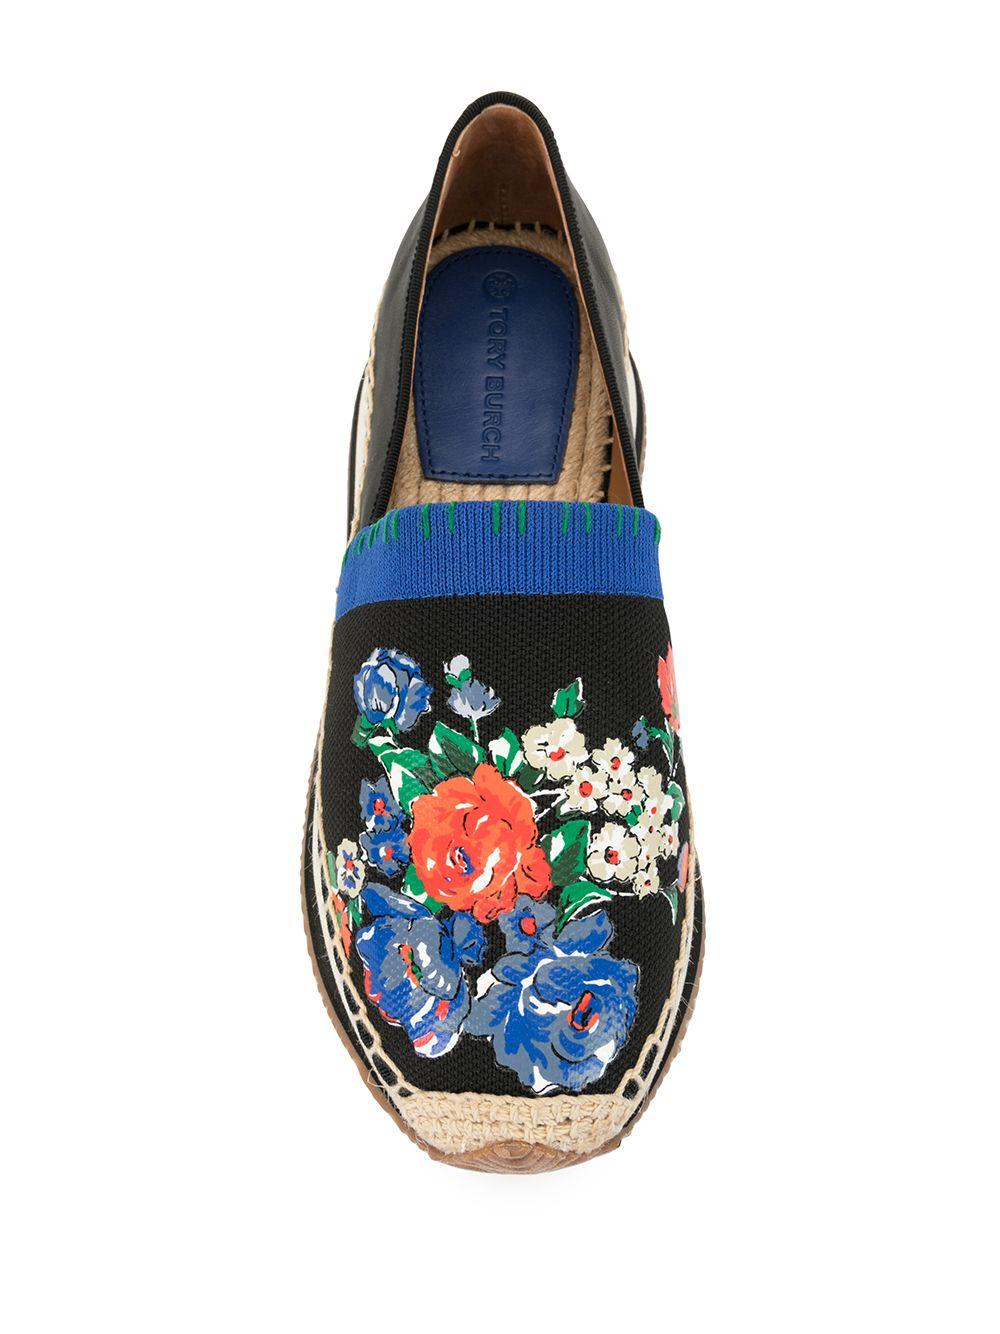 Tory Burch Daisy Floral Espadrilles in Blue | Lyst